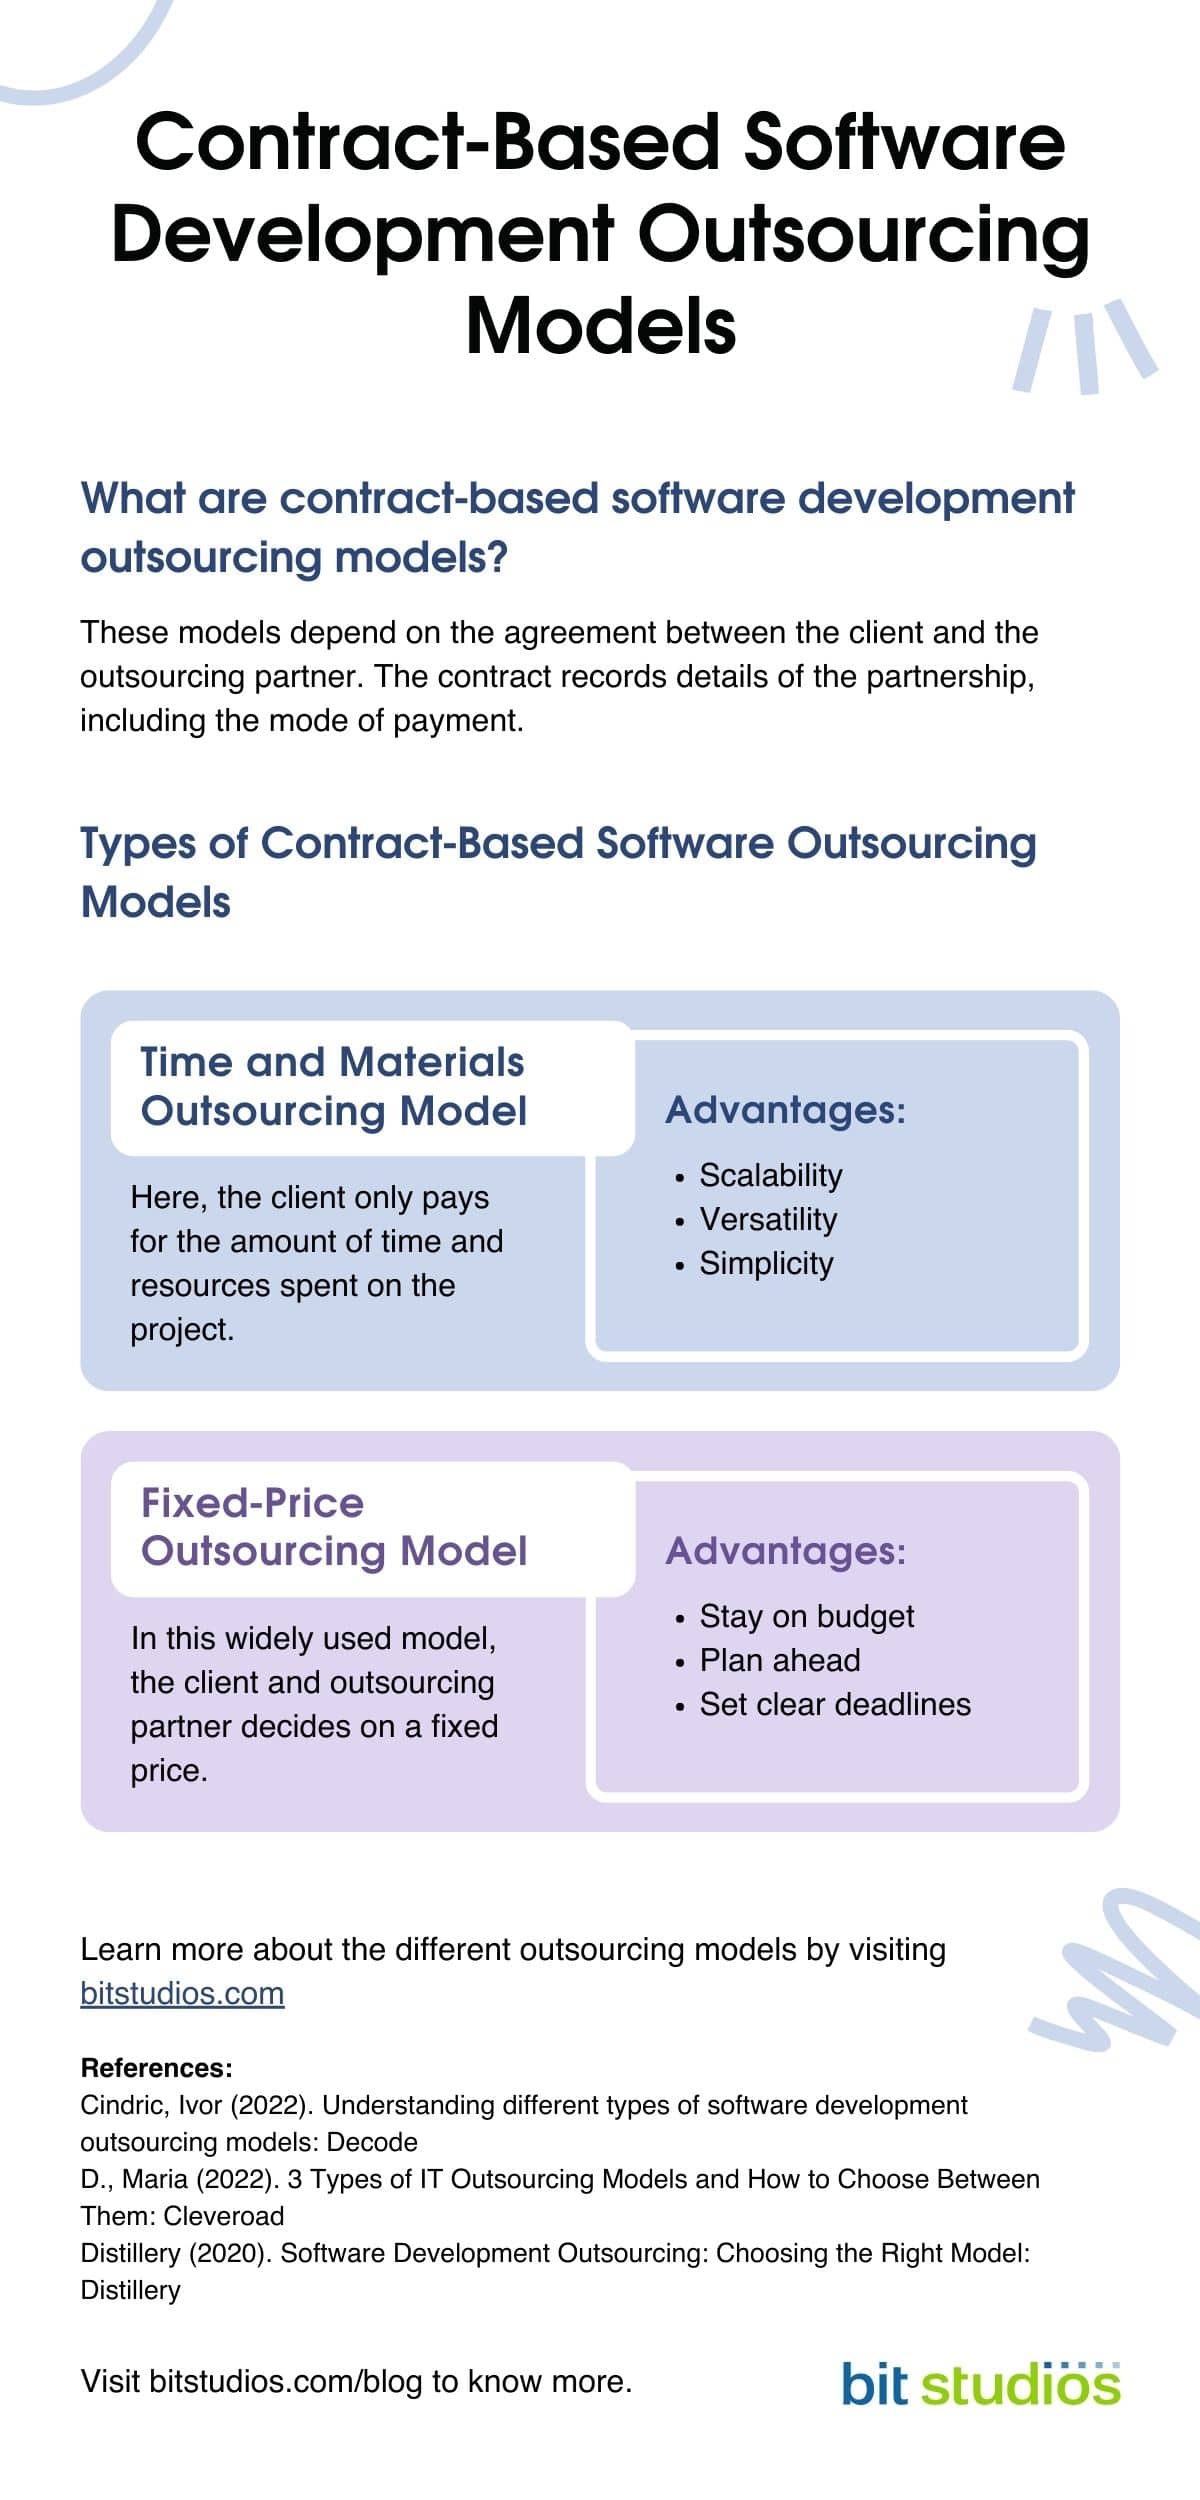 Contract-Based Software Development Outsourcing Models